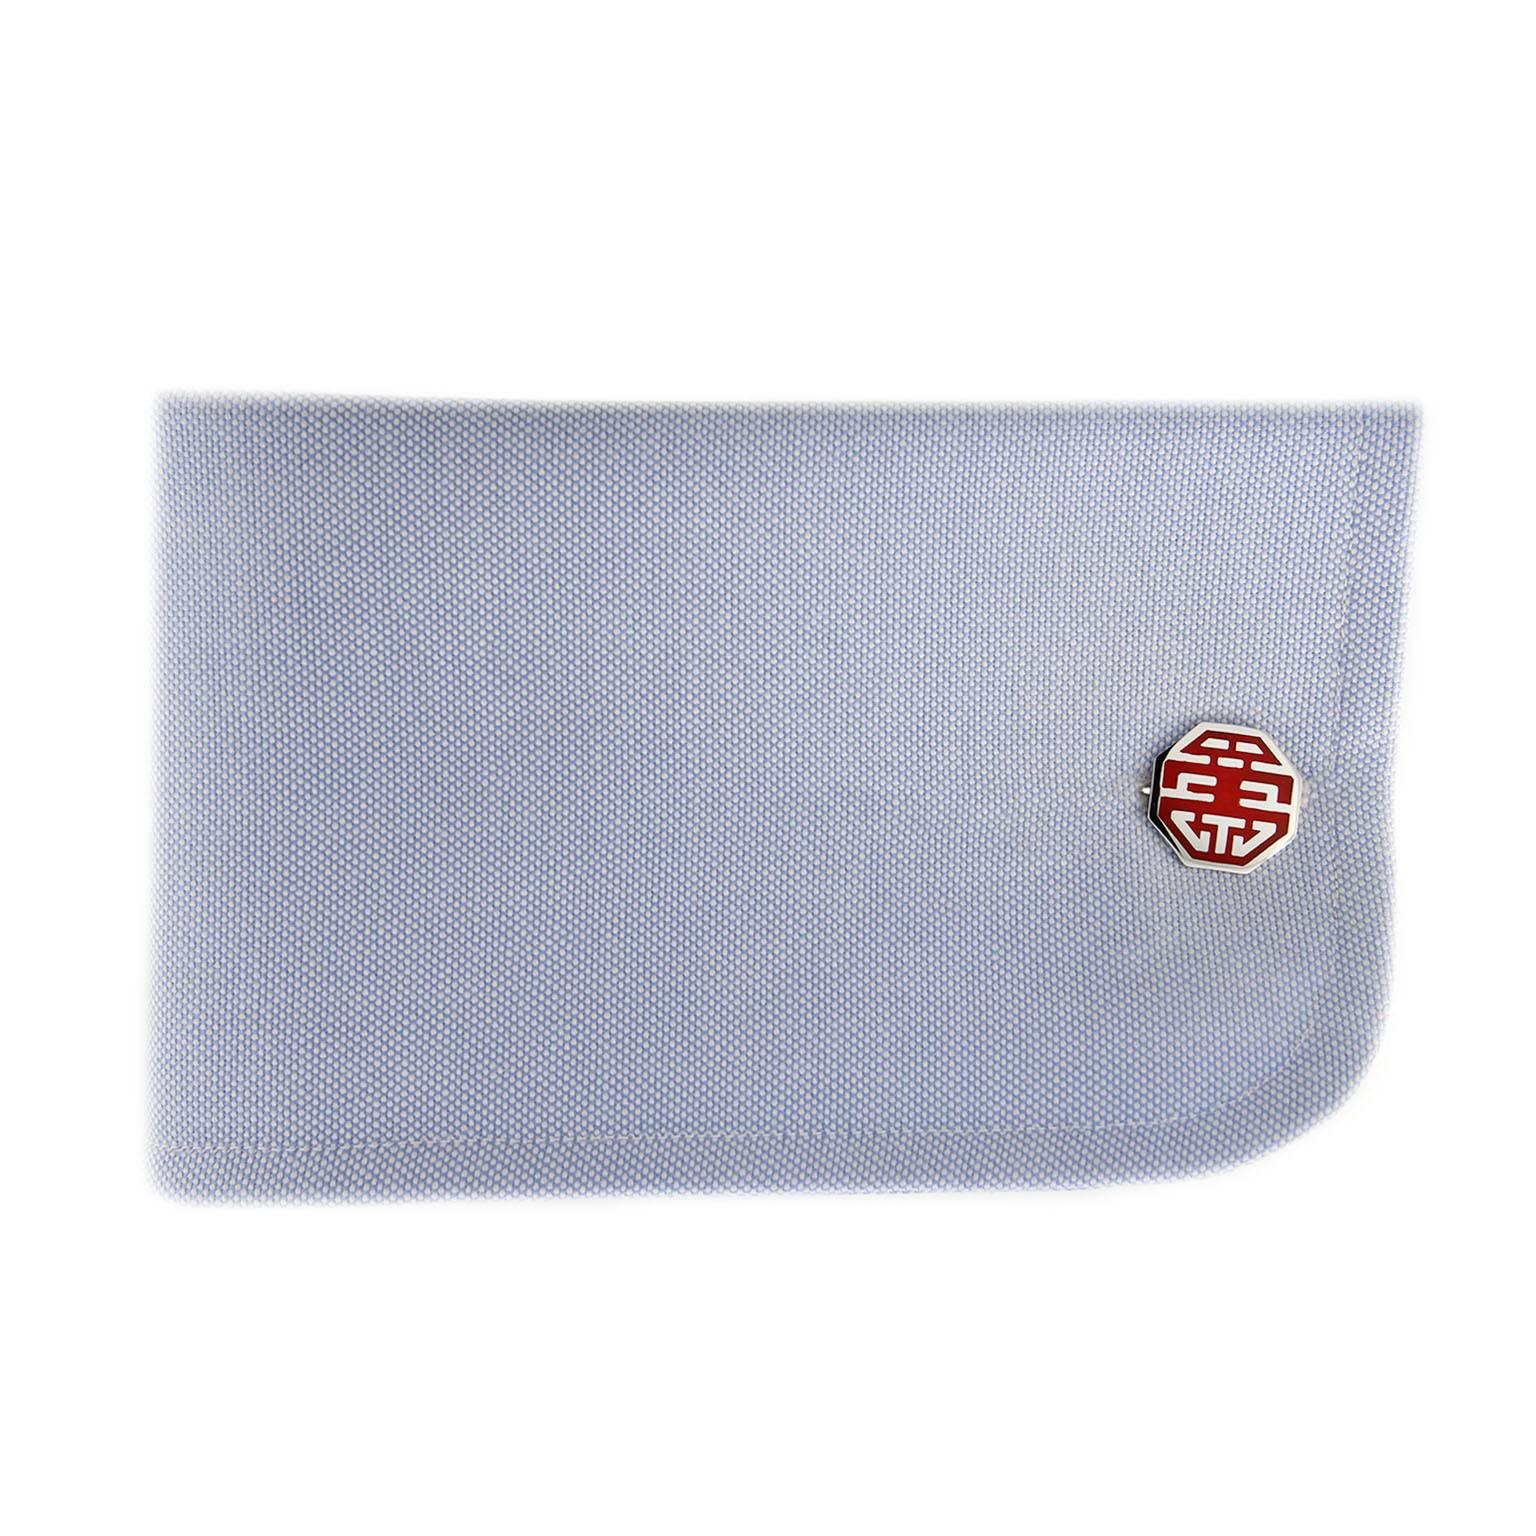 Alex Jona design collection “Long & happy Life”, hand crafted in Italy, sterling silver cufflinks with red enamel . Chinese luck bringer symbol since the time of emperors. Dimensions: Large button 0.56